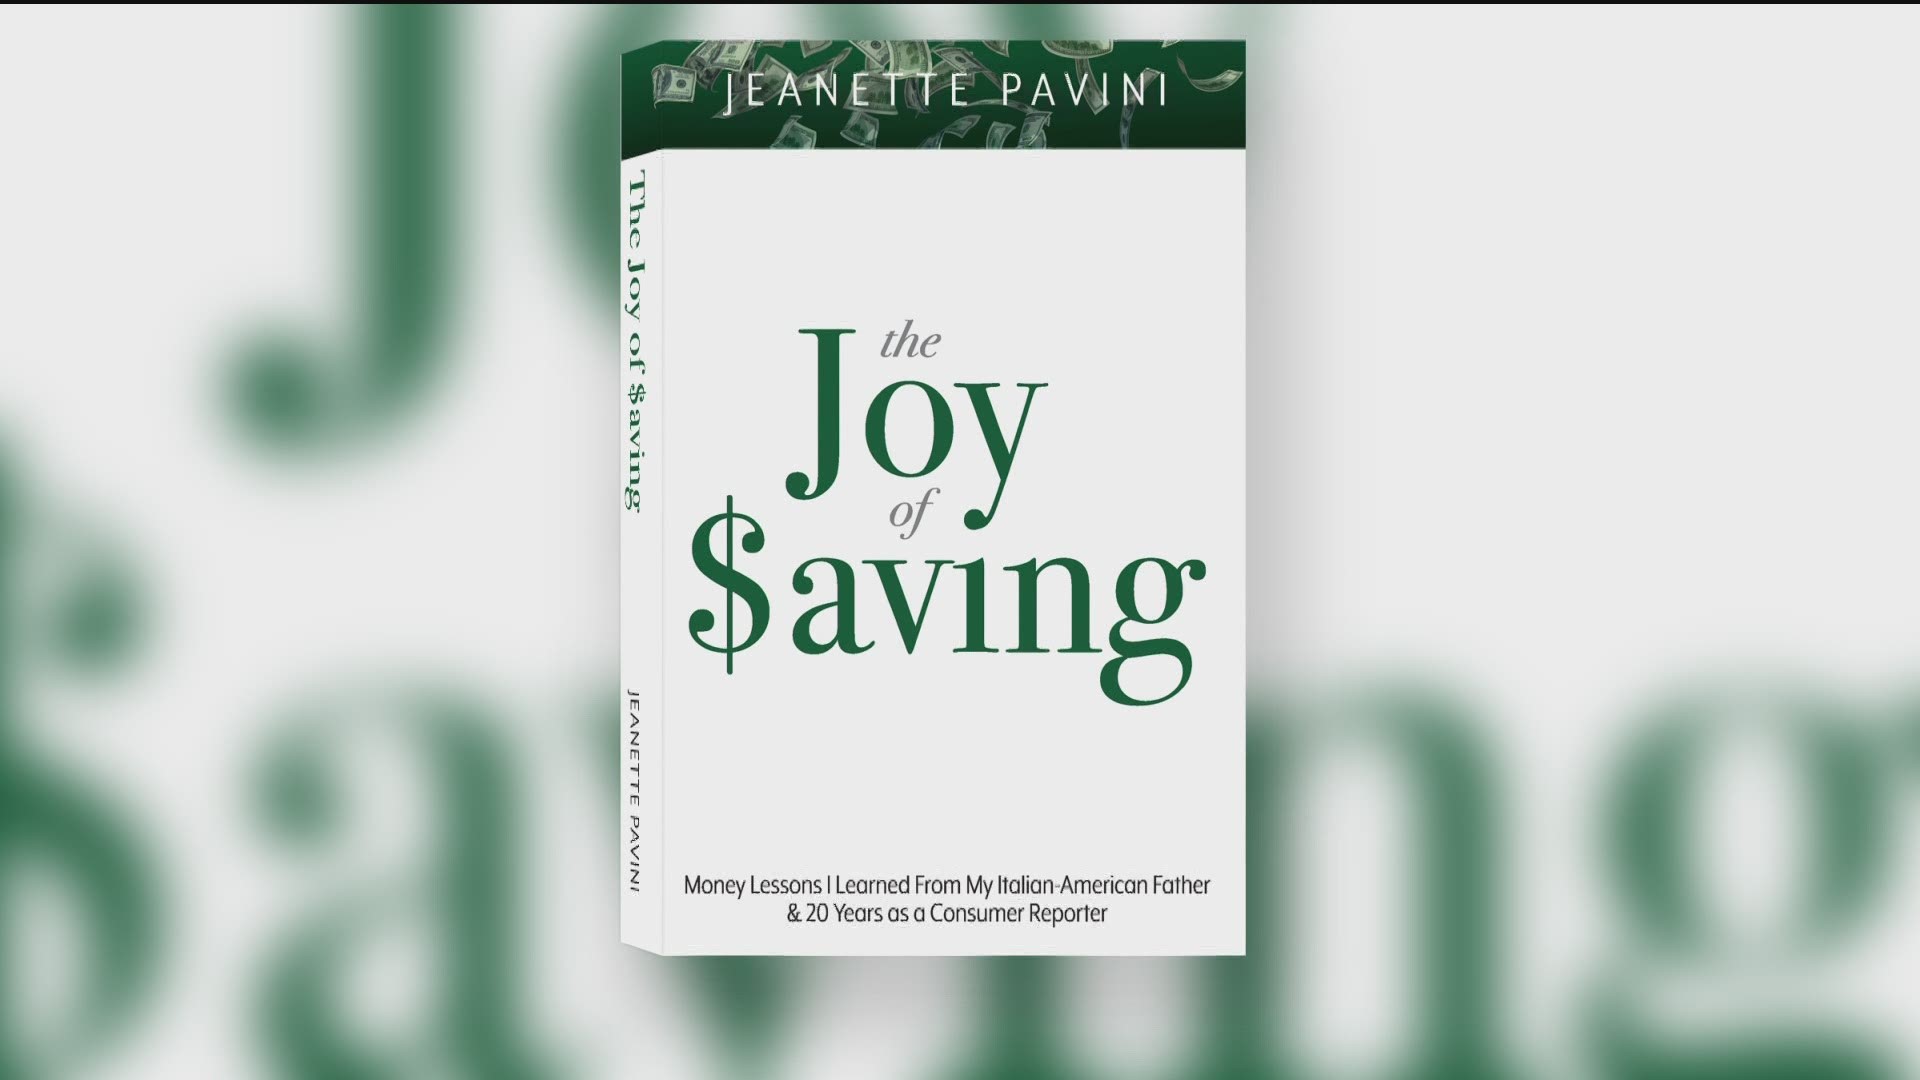 How is it possible to save money and give yourself a raise? Jeanette Pavini, the author of 'The Joy of $aving', gives financial tips to find money in our own budget.